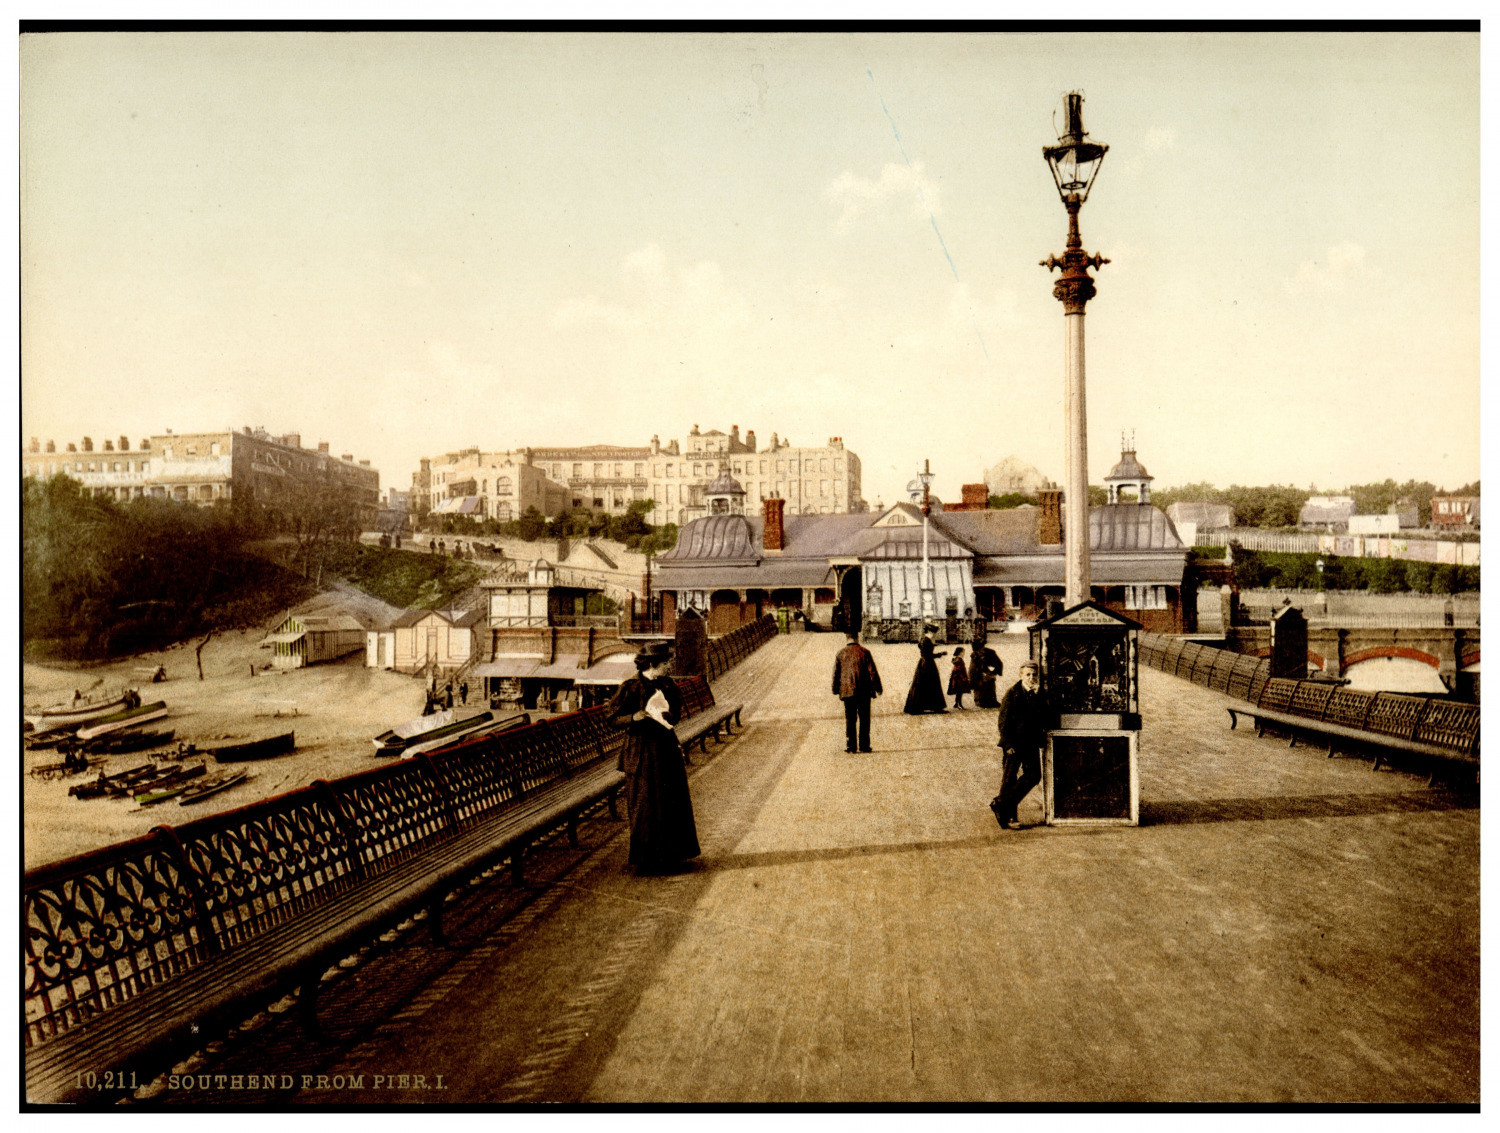 England. Southend-on-Sea. View from the Pier I. Vintage Photochrome by P.Z, P